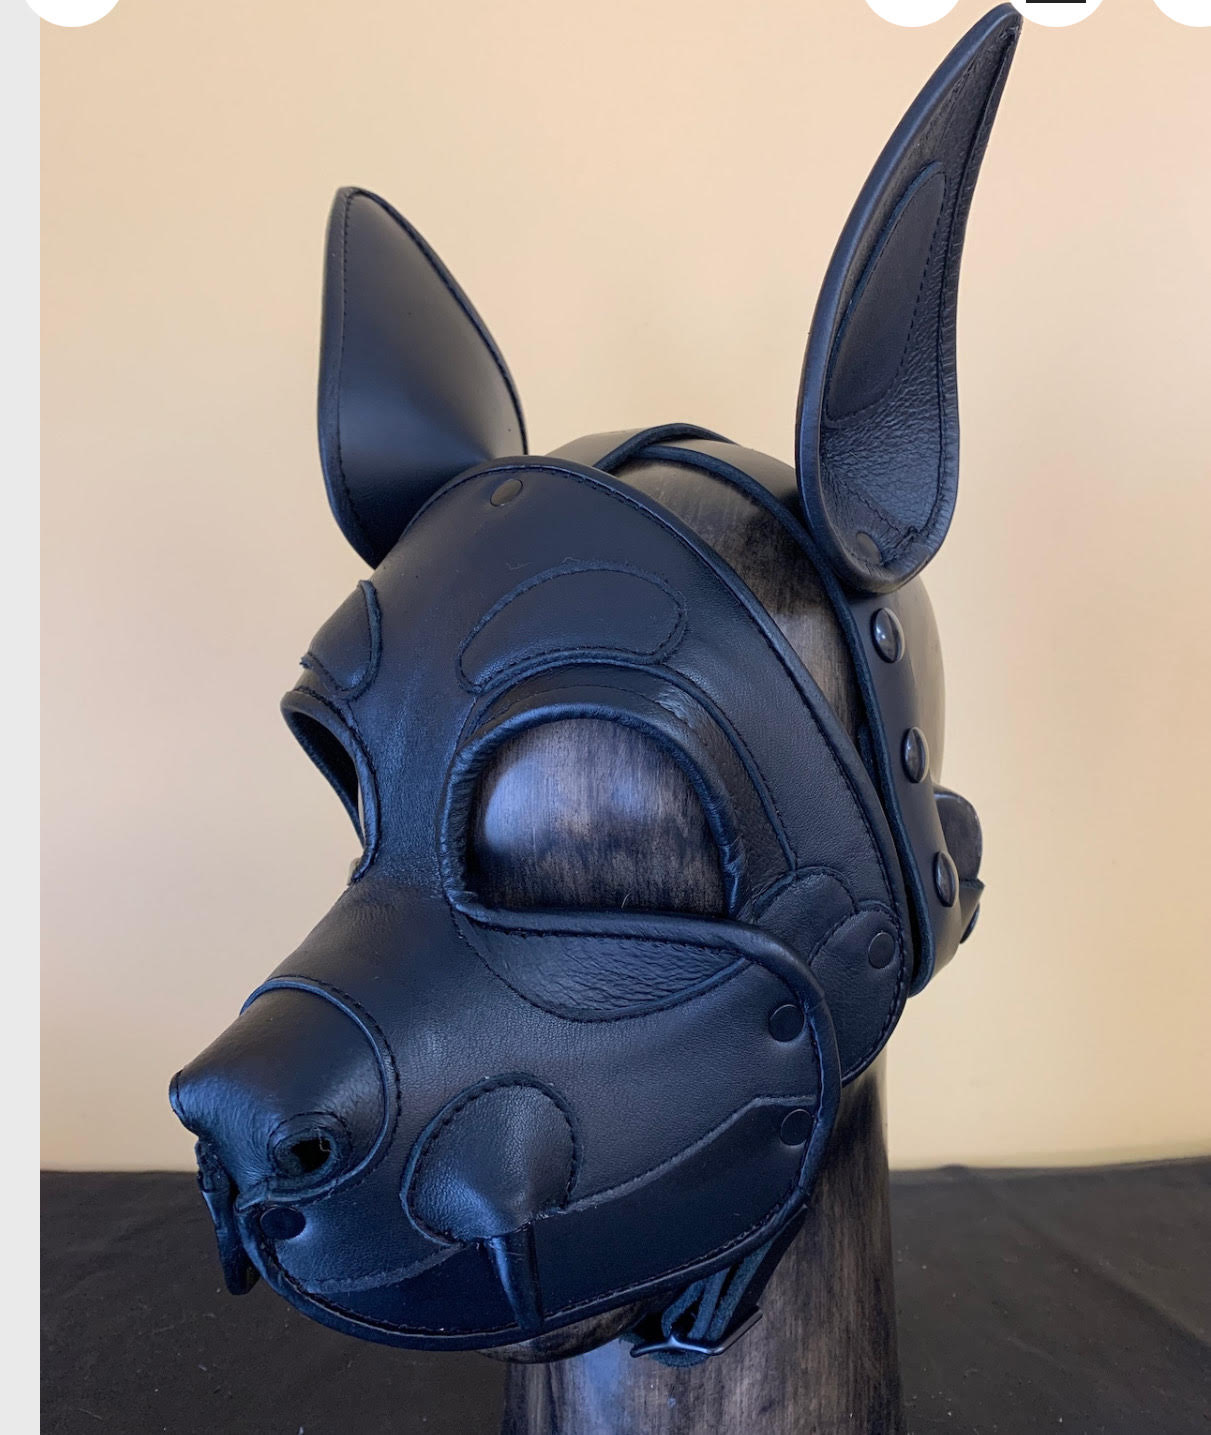 The Leather Shadow Demon Dog Mask on a mannequin head, left side view.